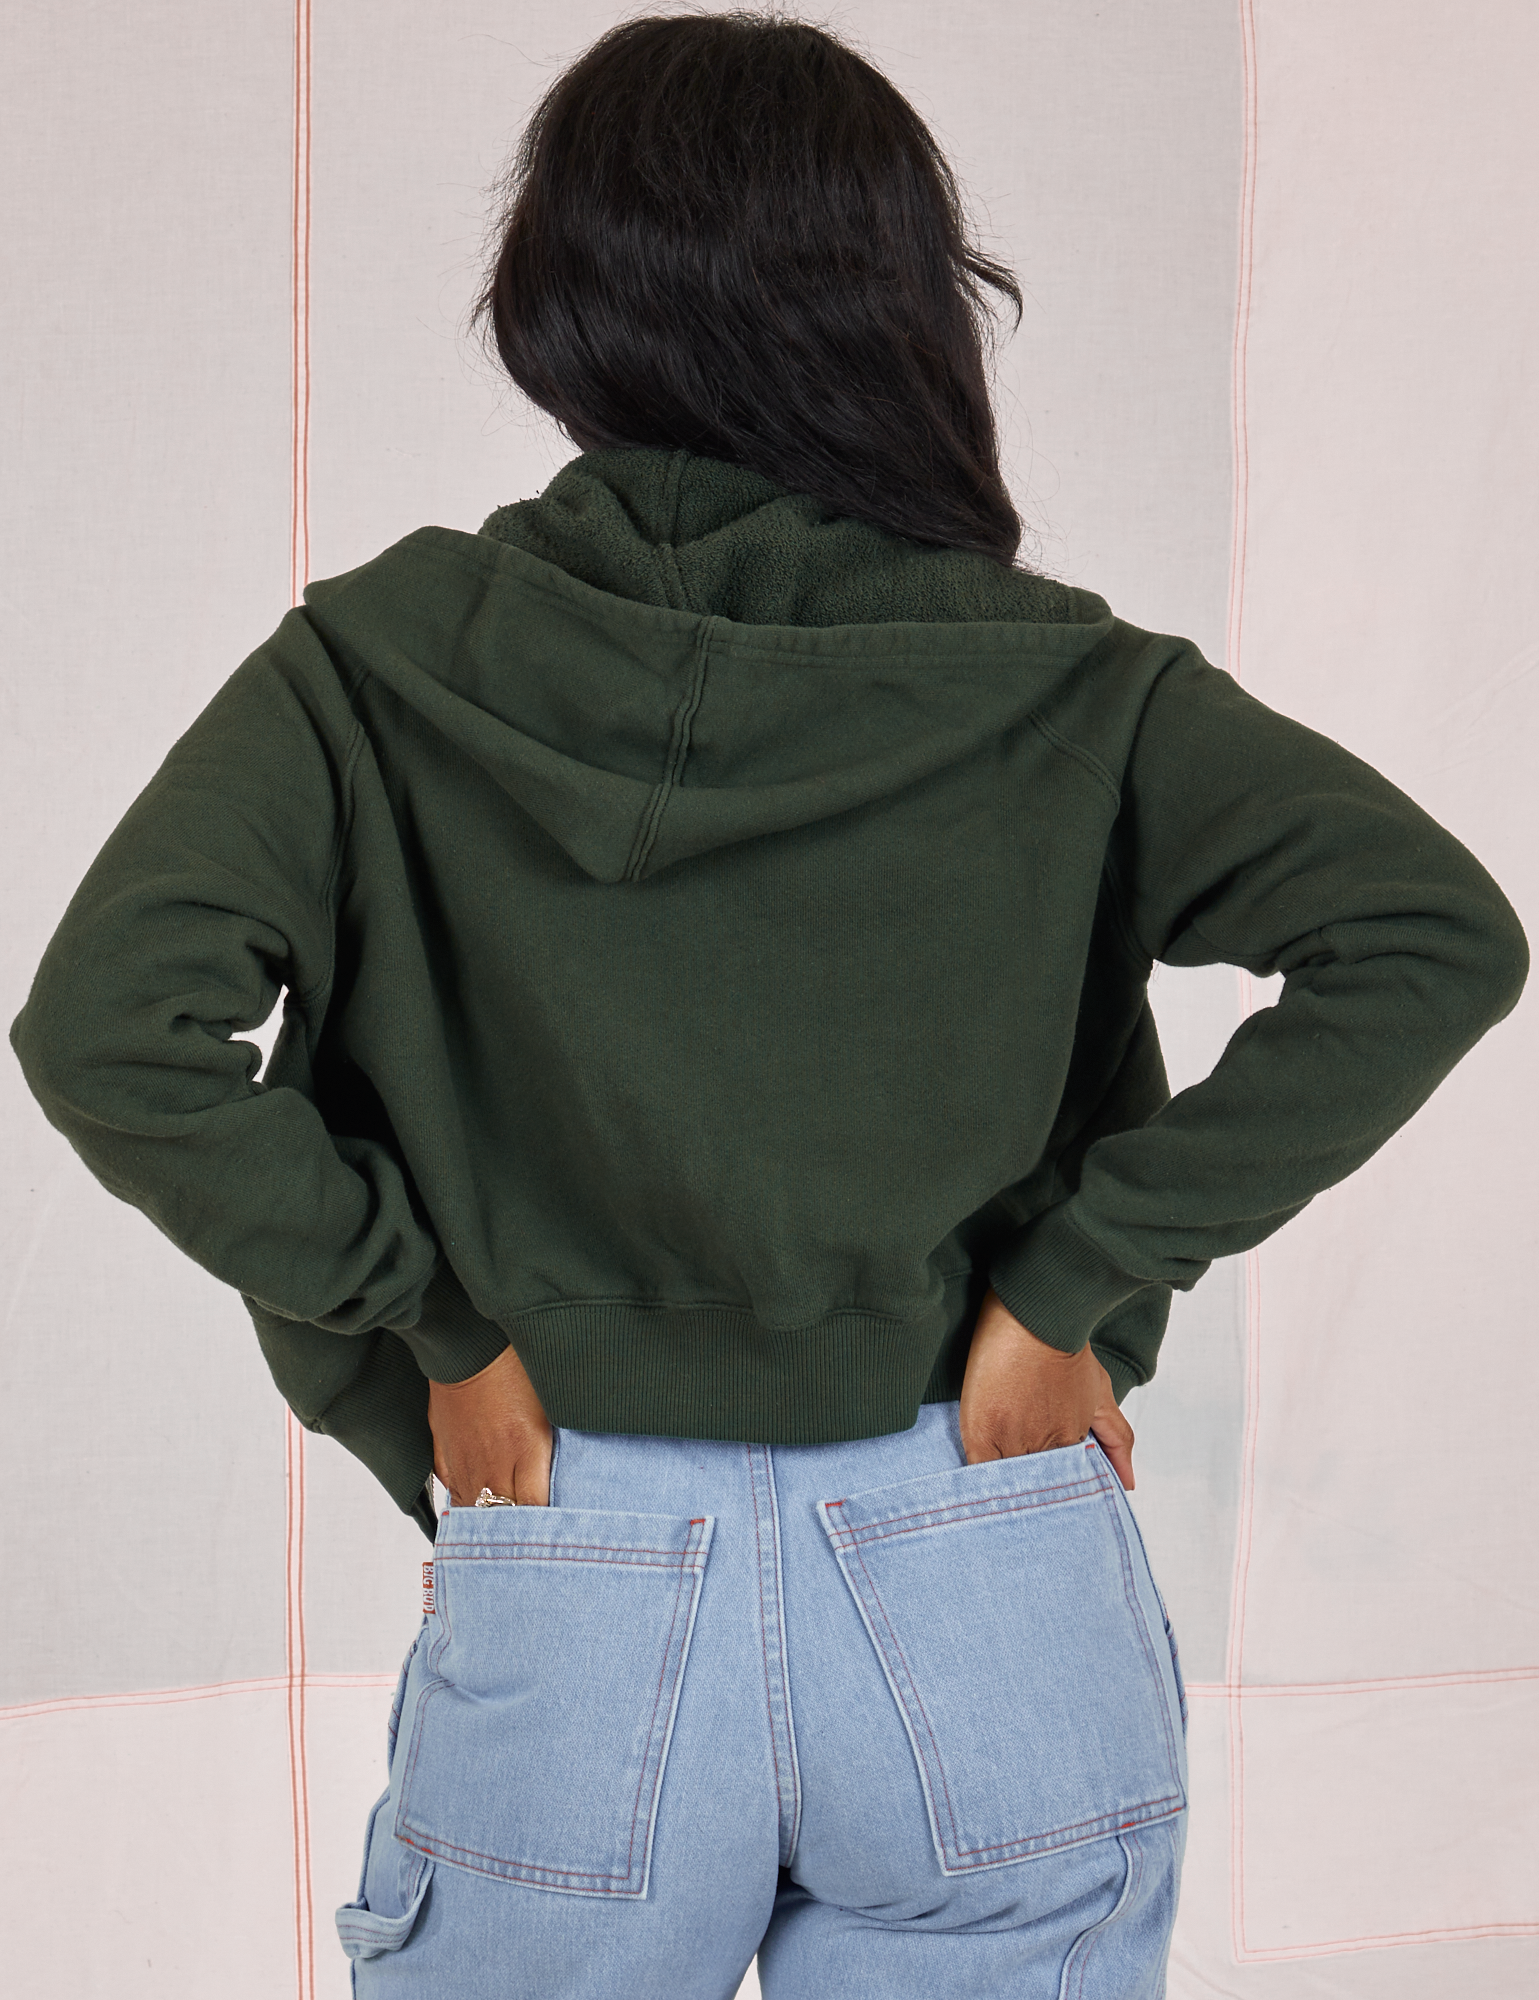 Cropped Zip Hoodie in Swamp Green back view on Kandia